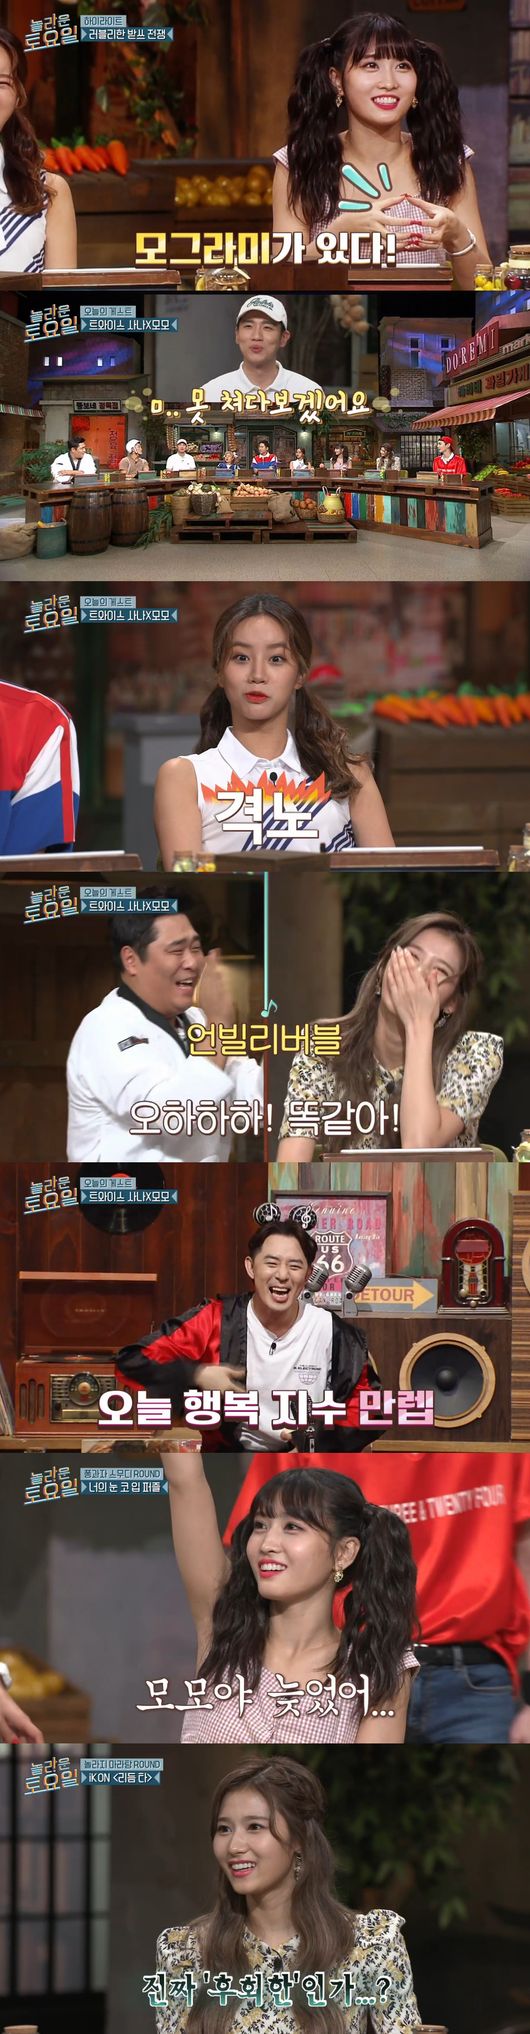 TVN Amazing Saturday is taking control of the house on Saturday evening with a pleasant music quiz.In three months of launch, Doremi Market has become a dictation entertainment for the fall of the sun and received the navel of viewers.Especially on the 4th broadcast, TWICE Sana and MOMO were on the way to the powerful power.2049 Target ratings averaged 2.0% and 2.8%, and it ranked first in the same time zone including cable and general, breaking its own record.(National / Nielsen Korea / Pay platform standard).Park Sung-jae CP said on May 5, Sana and MOMO came back from music broadcasting at the time of recording, but they really participated in the recording without any tiredness.Especially, even though I am Japanese, I wrote Hangul so well and my understanding of Korean was so high that most of the members were surprised. On this day, Sana and MOMO challenged the lyrics with Shin Dong-yup, Hyeri, Shiny Key, Kim Dong-Hyun, Park Na-rae, Year, Mun Se-yun.I wrote hard on the blue of red puberty and the rhythm ride of icon to eat the money gas and maratang of the telephoto market.Looking at the two eager people, Shin Dong-yup and other members could not erase a smile.Key said, I will work harder. He enthusiastically gave Sana and MOMO food, and laughed at those who wrote TWICE JYP on the middle note where the quiz was released.Park Sung-jae CP said, Troubles are popular, but senior singers such as Kee, Hyeri, and Hanhae have been very popular as juniors and fans.Thanks to this, Sana and MOMO also made recording easier.Shin Dong-yup boasted that her daughter was a big fan of TWICE and Mun Se-yun and Kim Dong-Hyun were also happy as uncle fans. Thanks to TWICE, its Amazing Saturday, which has the highest audience rating of its own. Its a moment that has definitely established itself as a Saturday entertainment.Thank you to the viewers the most and thank the members who always do their best, and I also felt the power of TWICE. Thank you so much to Sana MOMO, said Park Sung-jae, CP.Amazing Saturday is broadcast every Saturday at 7:40 pm.Amazing Saturday